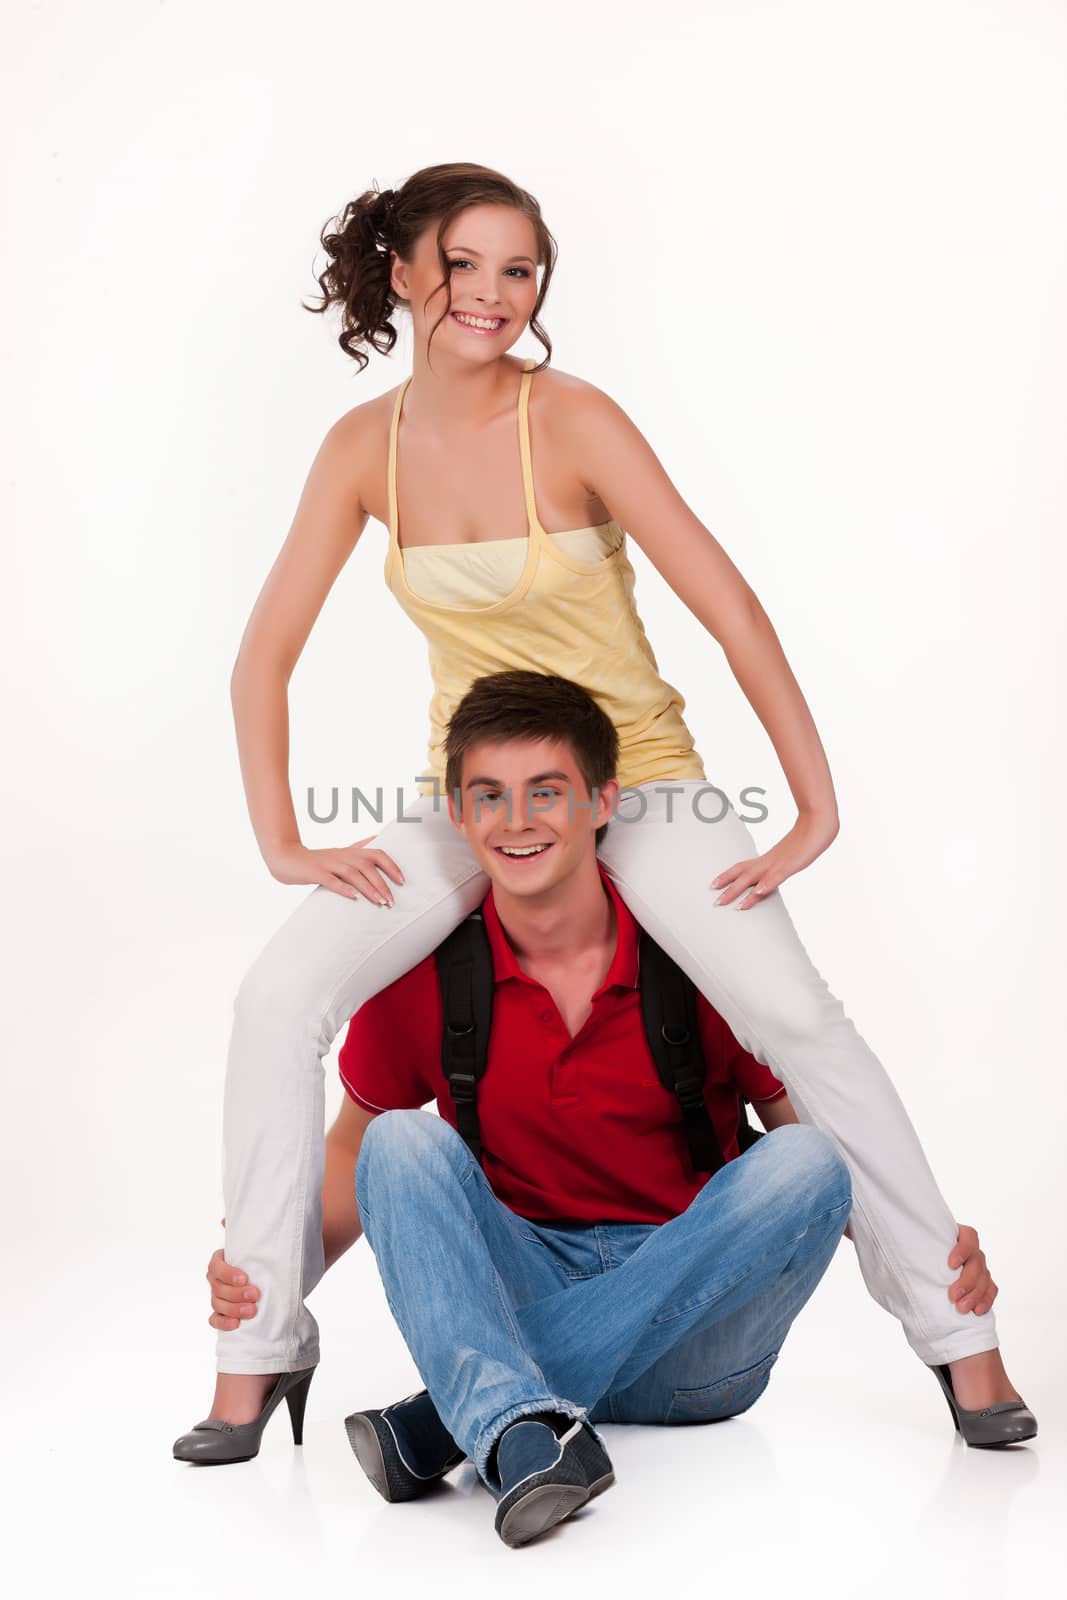 Young Smiling Woman and Man by Fotoskat